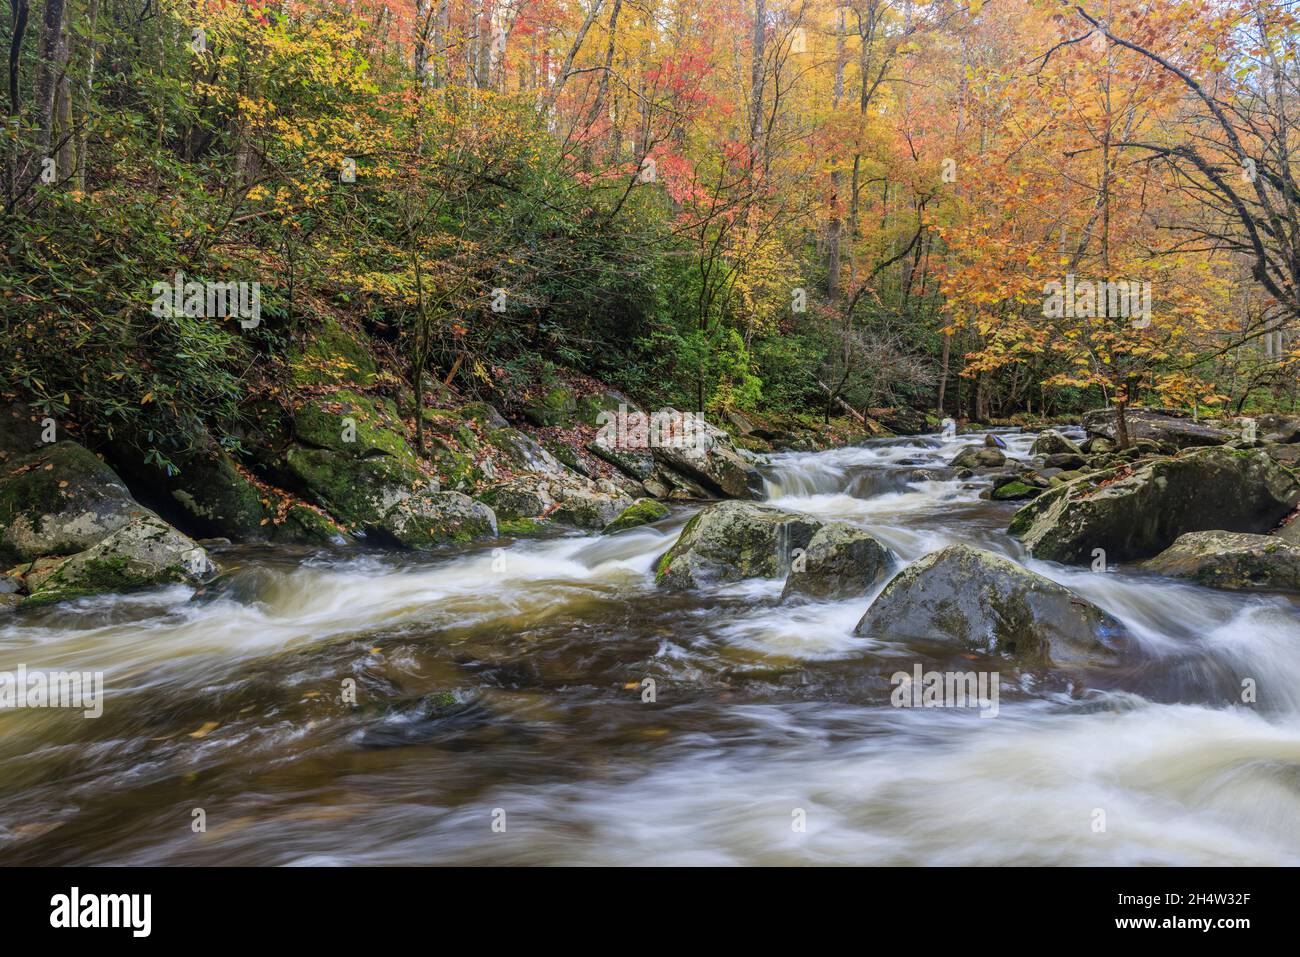 The Middle Prong Little River flows over rocks under fall foliage in Great Smoky Mountains National Park. Stock Photo